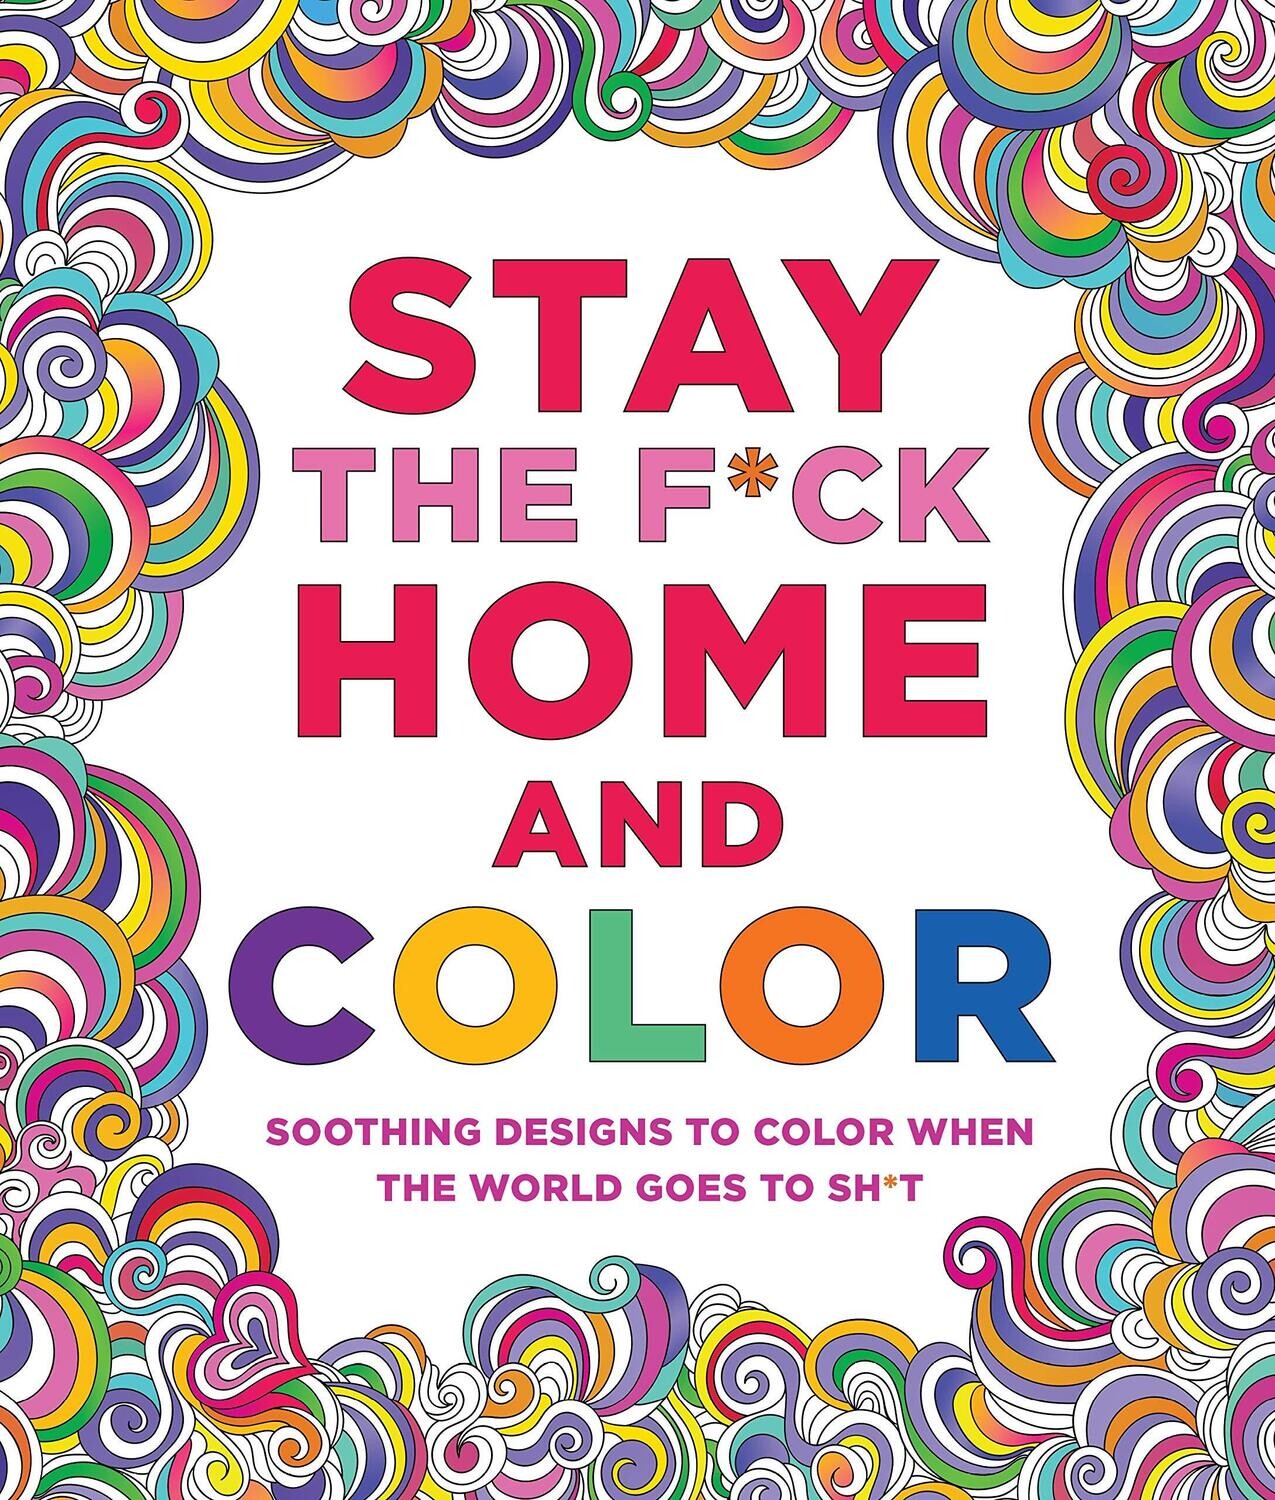 Stay The Fuck Home and Color